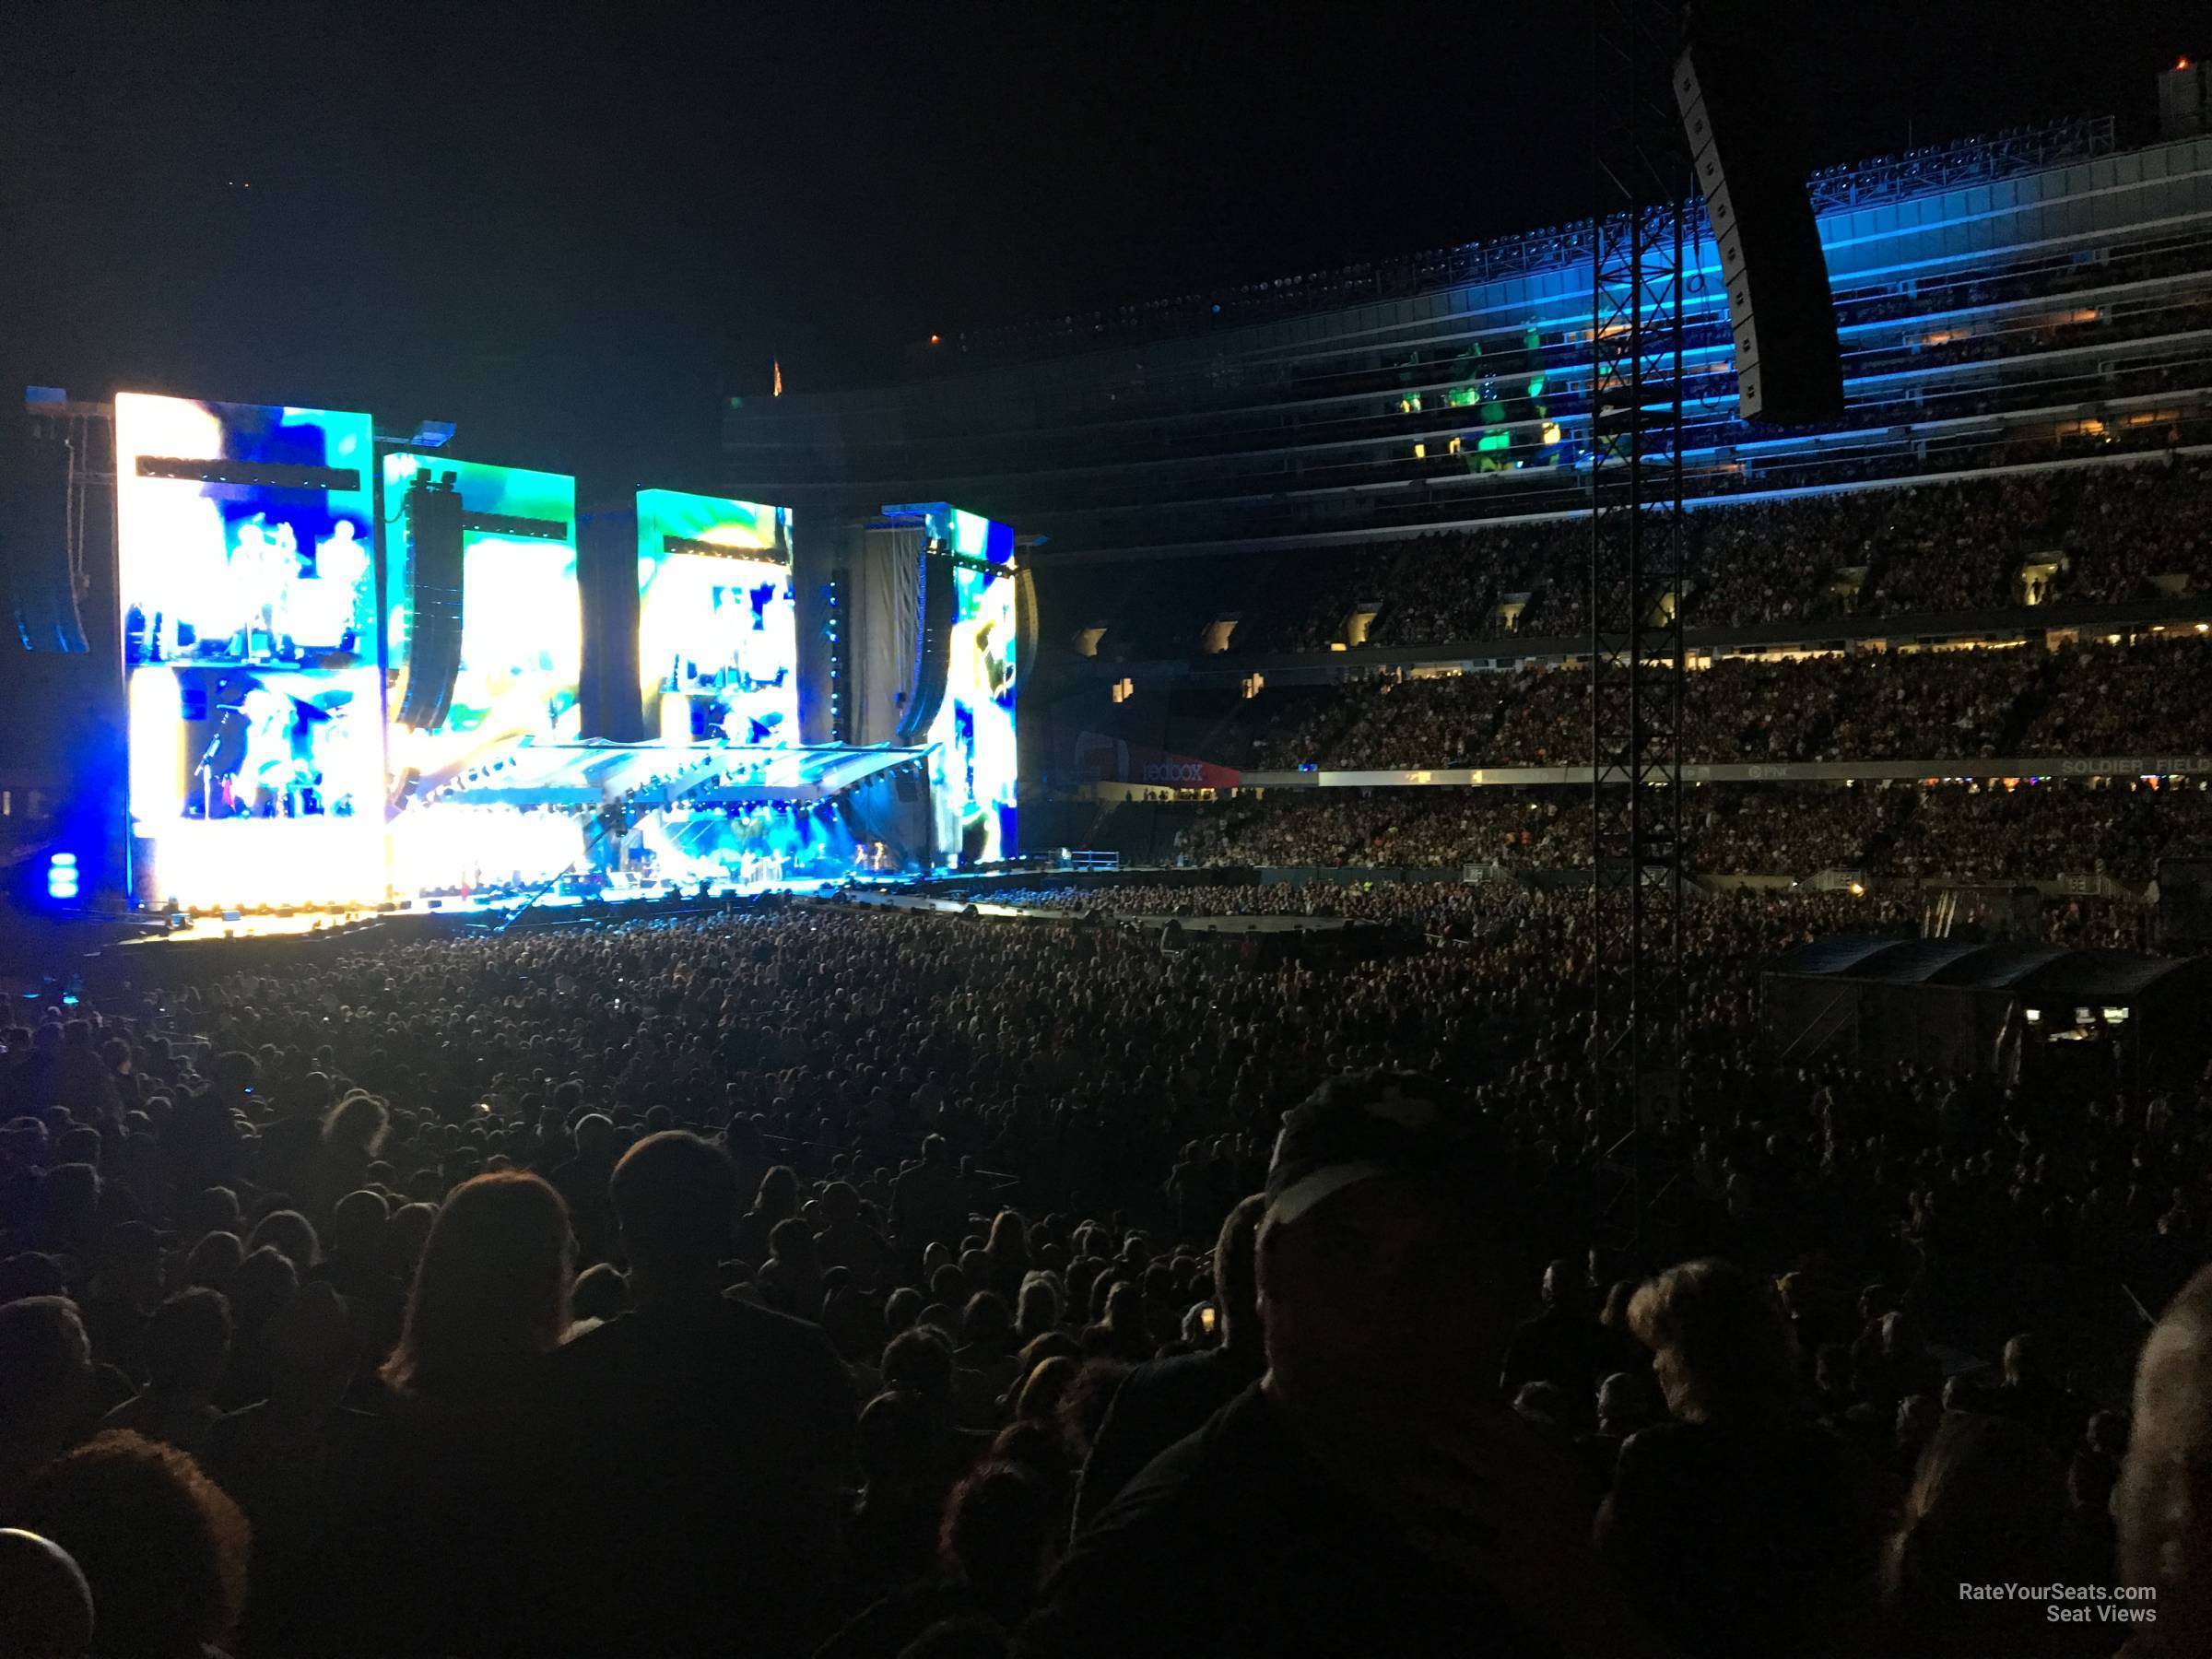 section 134, row 19 seat view  for concert - soldier field